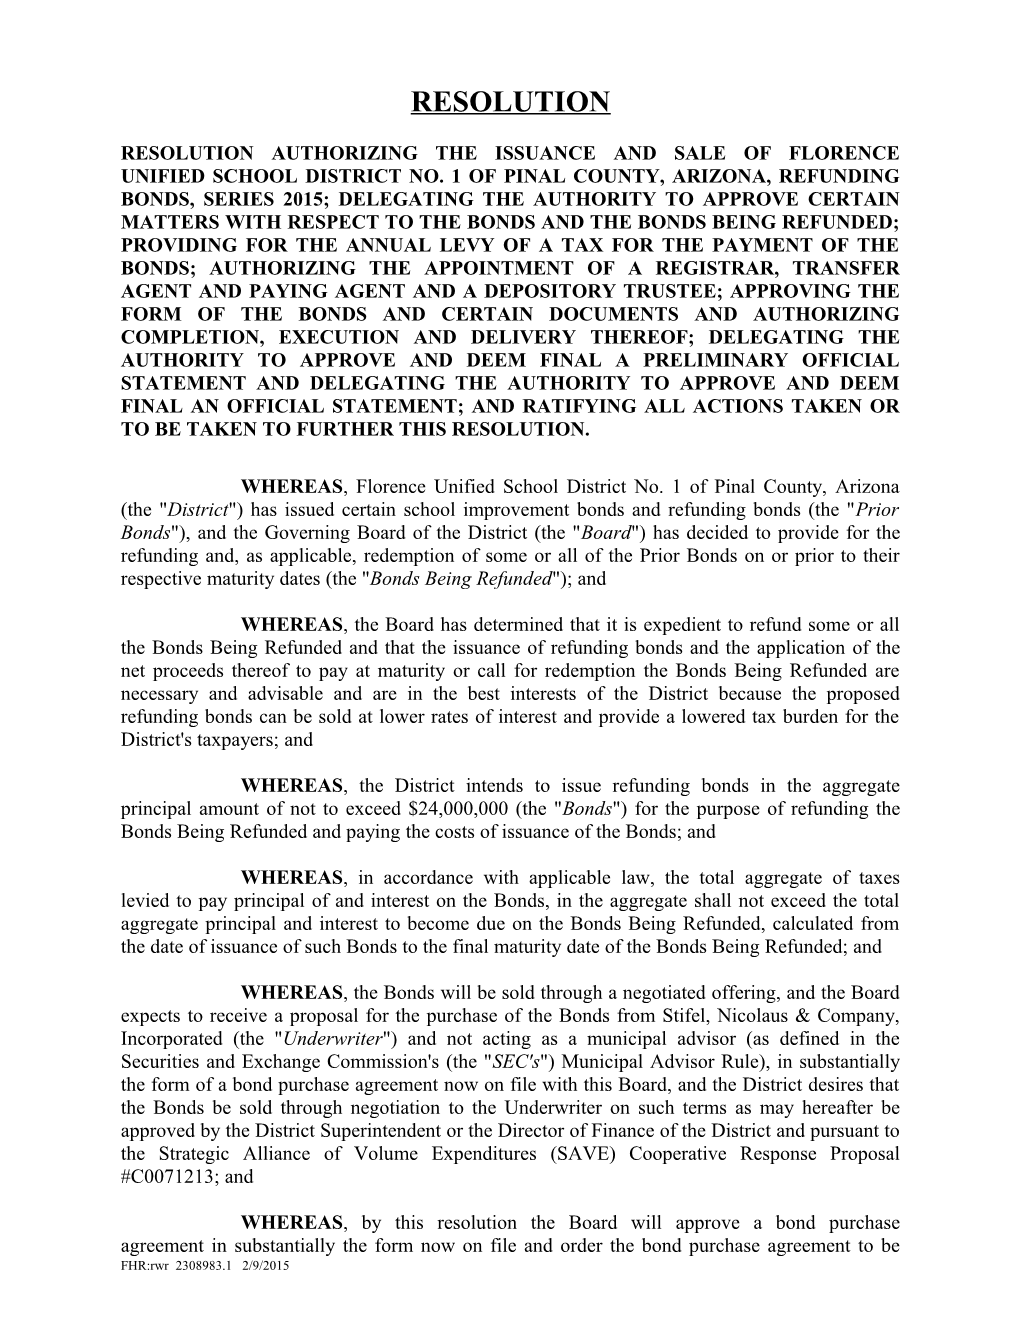 Resolution Authorizing the Issuance and Sale of Florence Unifiedschool District No. 1